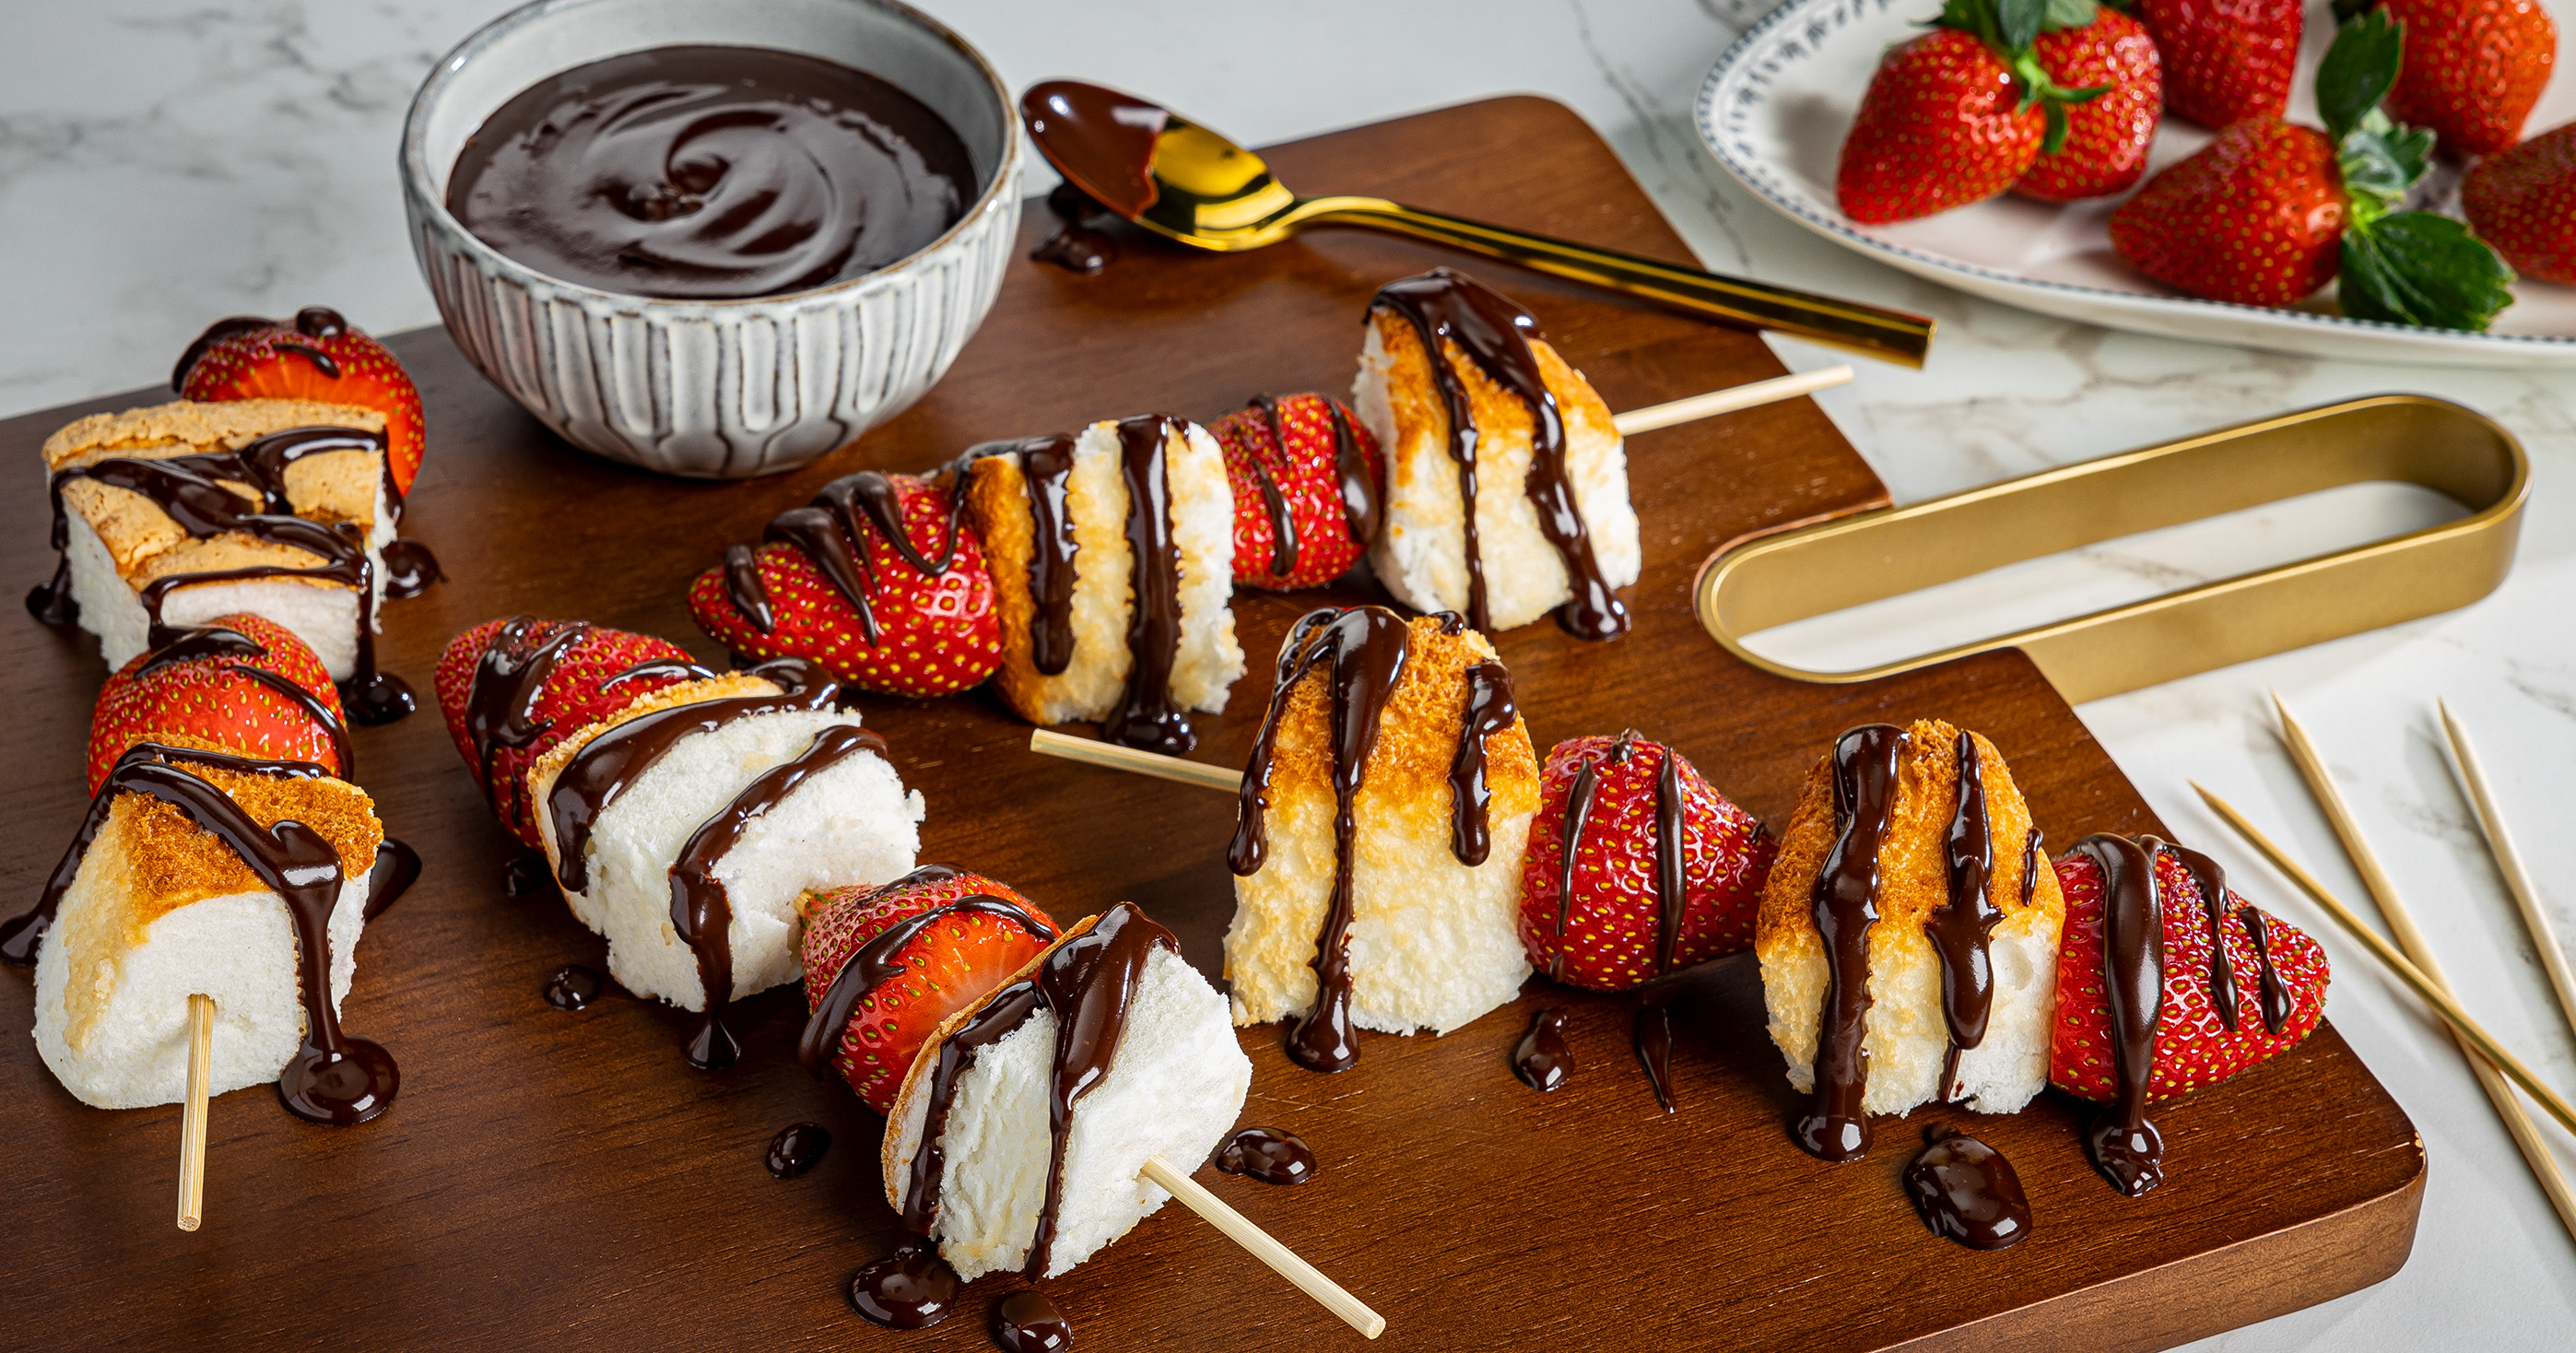 Strawberry and Cake Kabobs with Chocolate Cream Dip